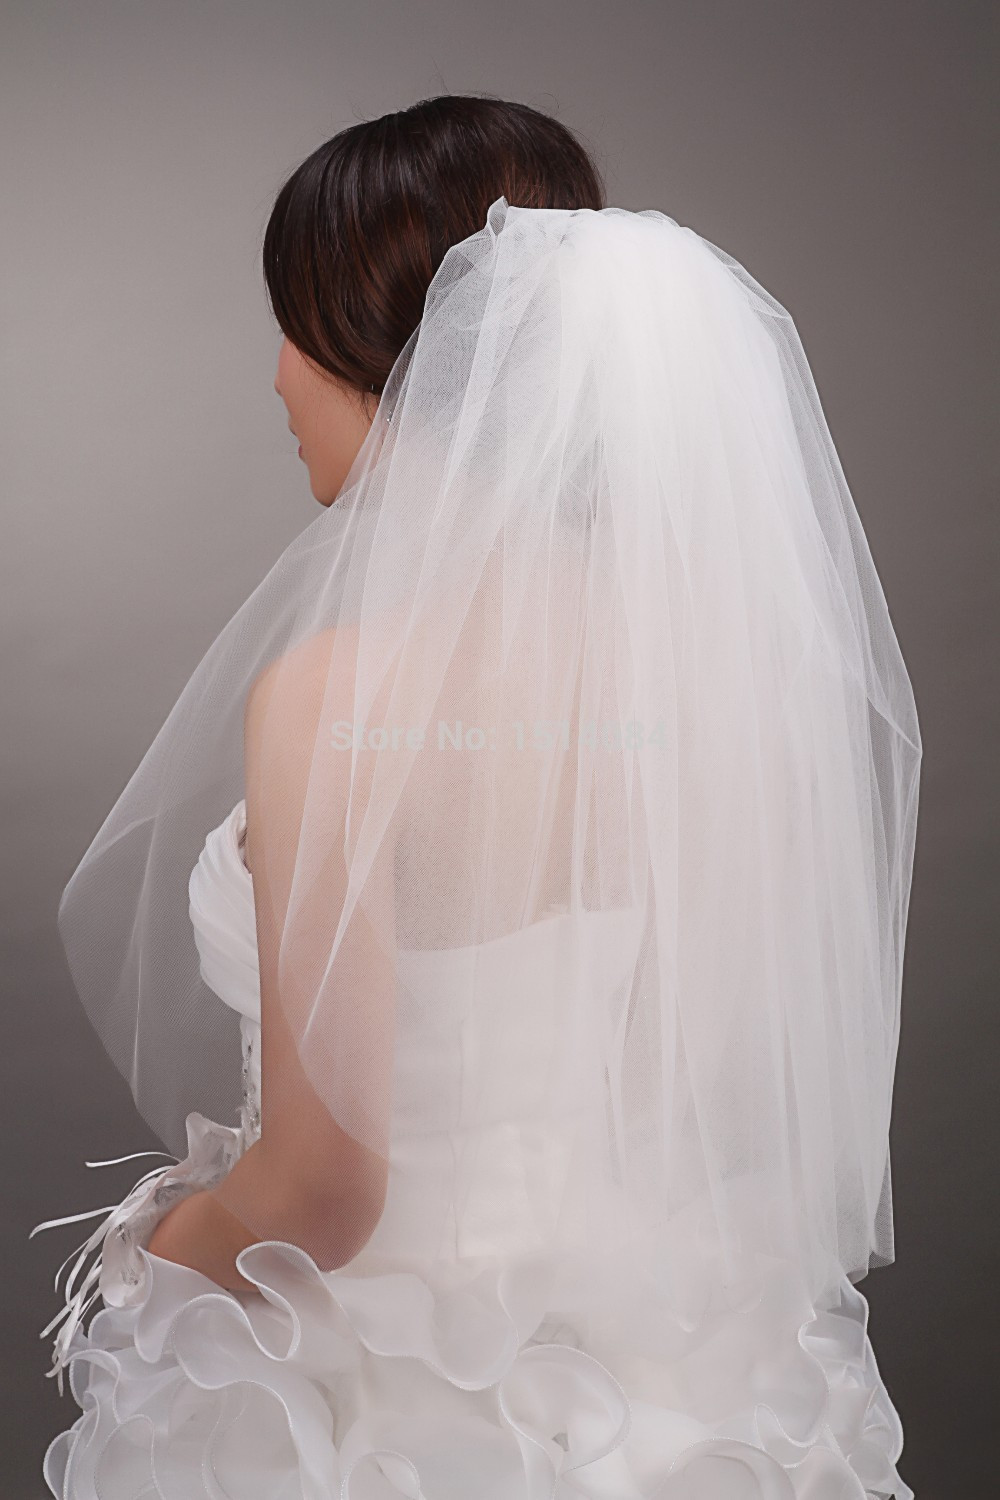 Discount Wedding Veils And Accessories
 Free Shipping Hot Sale High Quality Cheap Wedding Veils